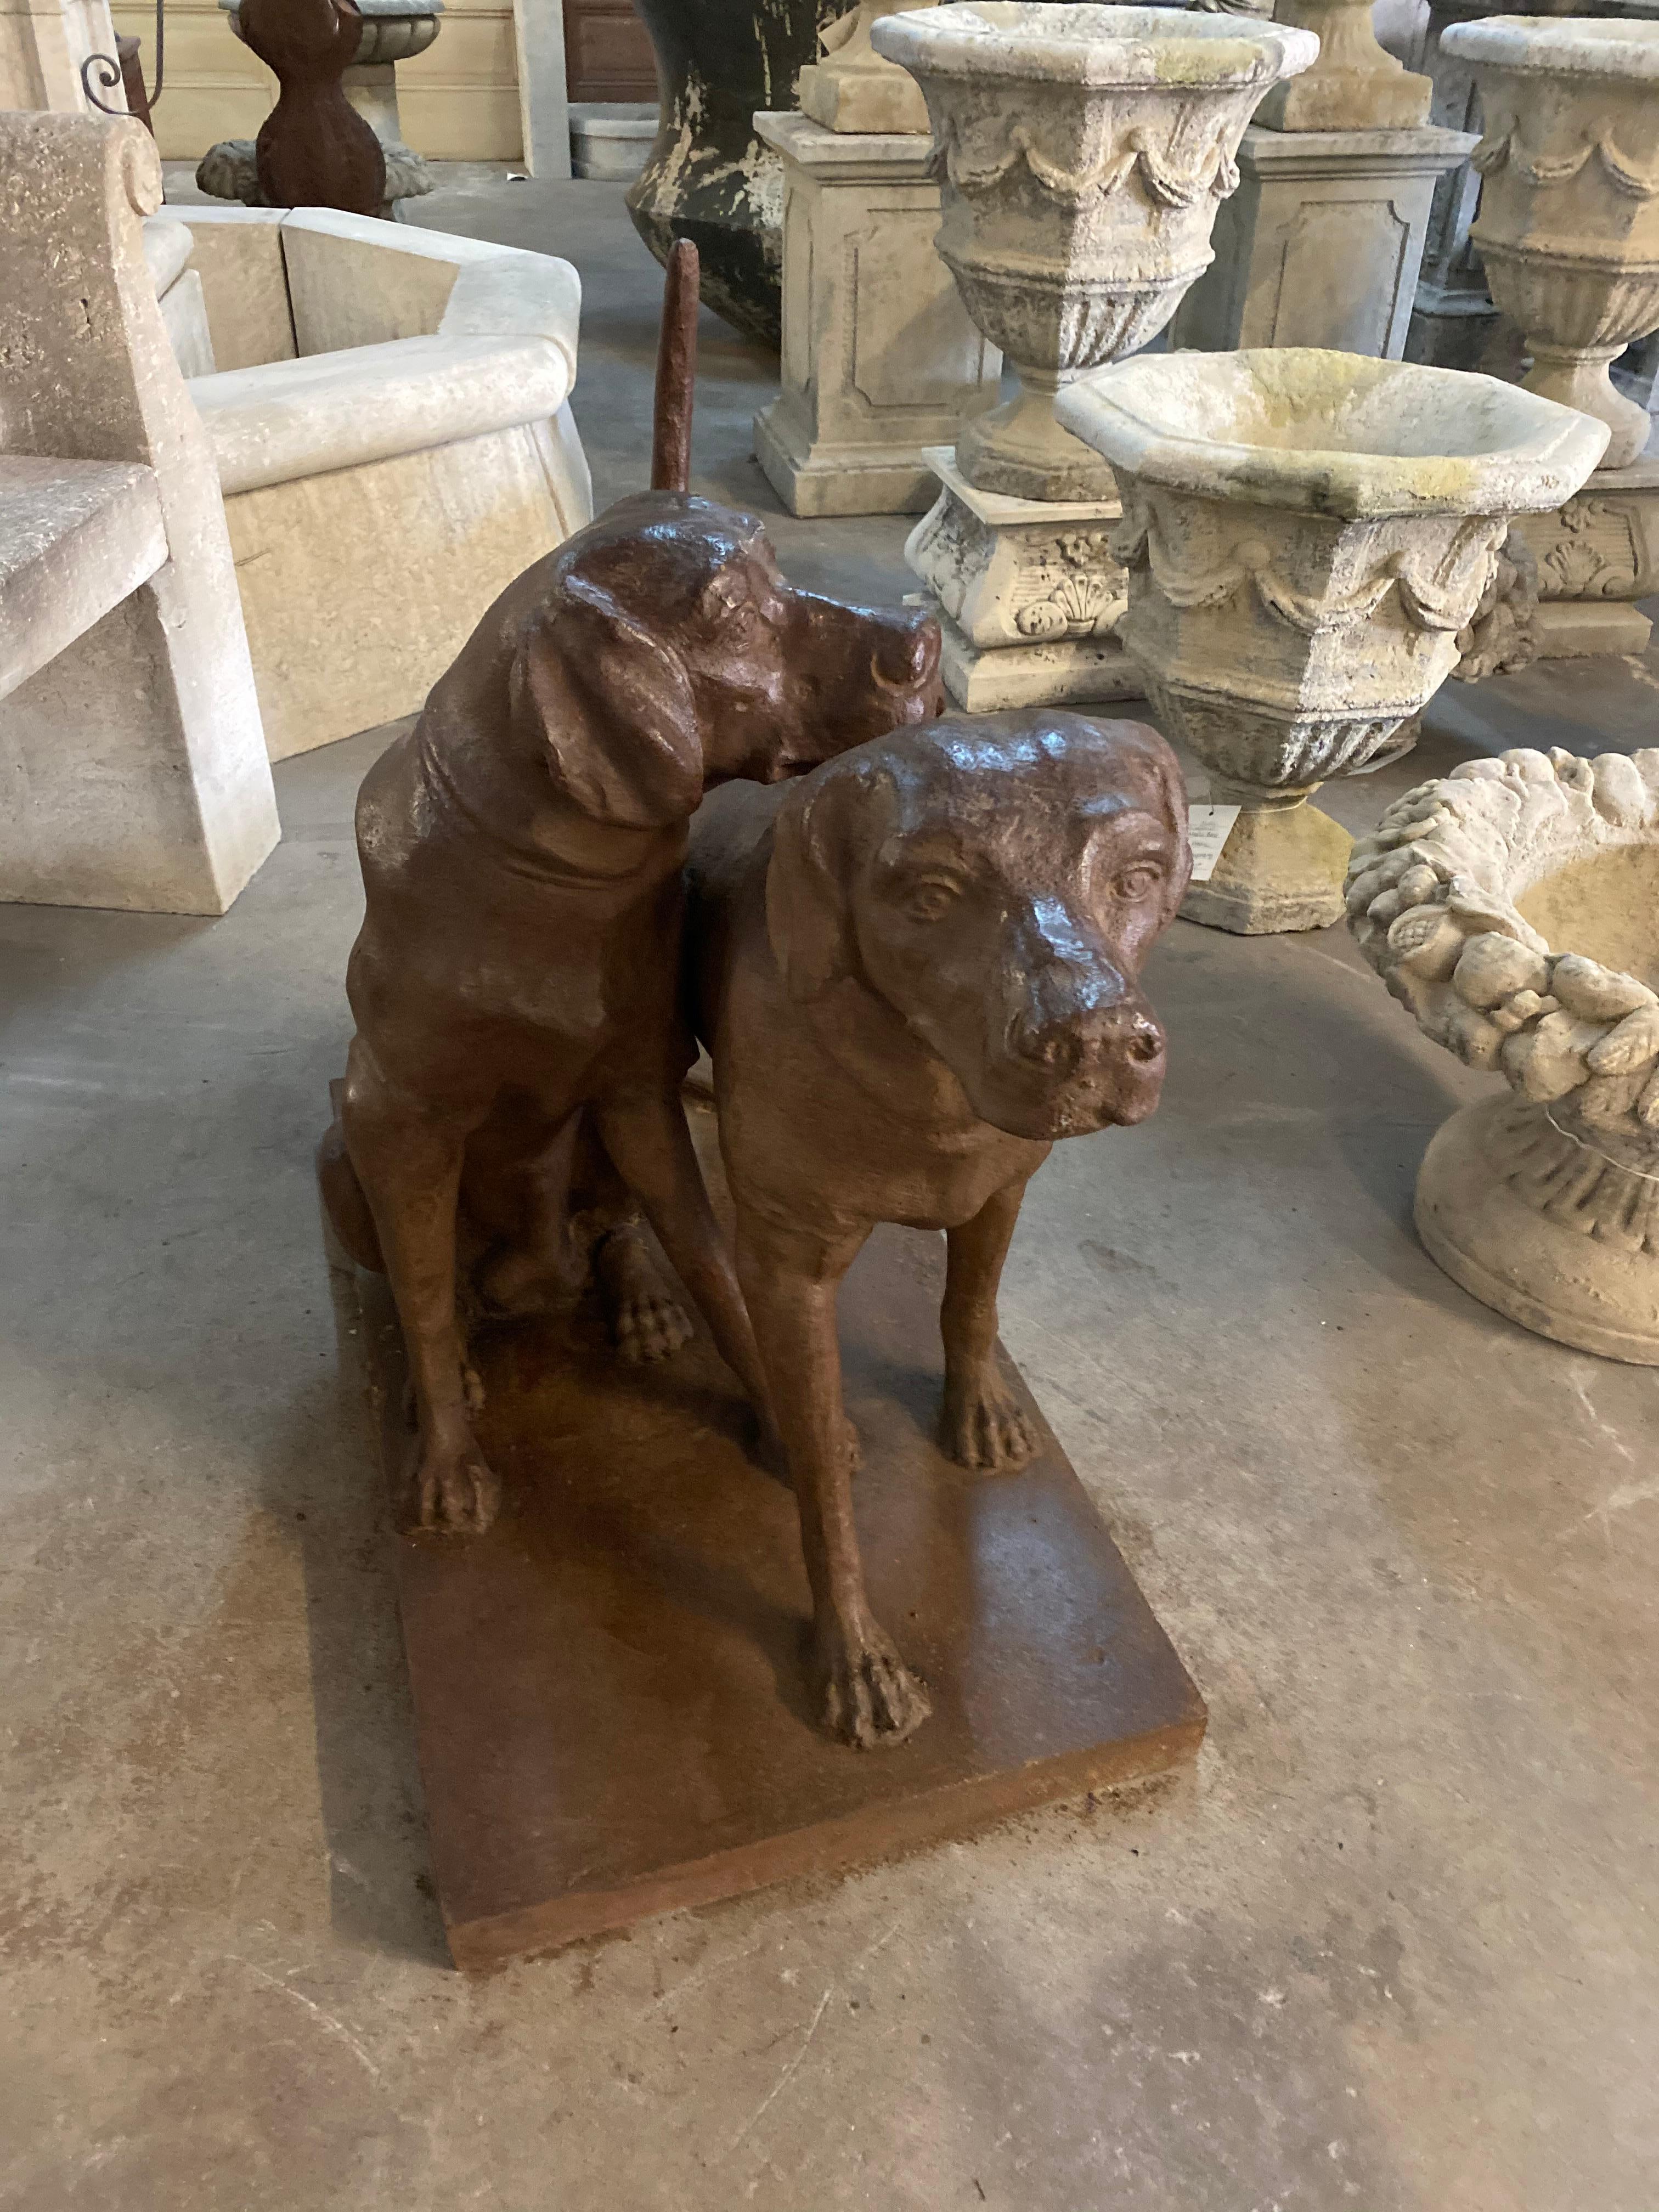 This iron statue depicts a pair of Labrador retriever dogs side by side. Buffed iron wax finish. 

Measurements: 31